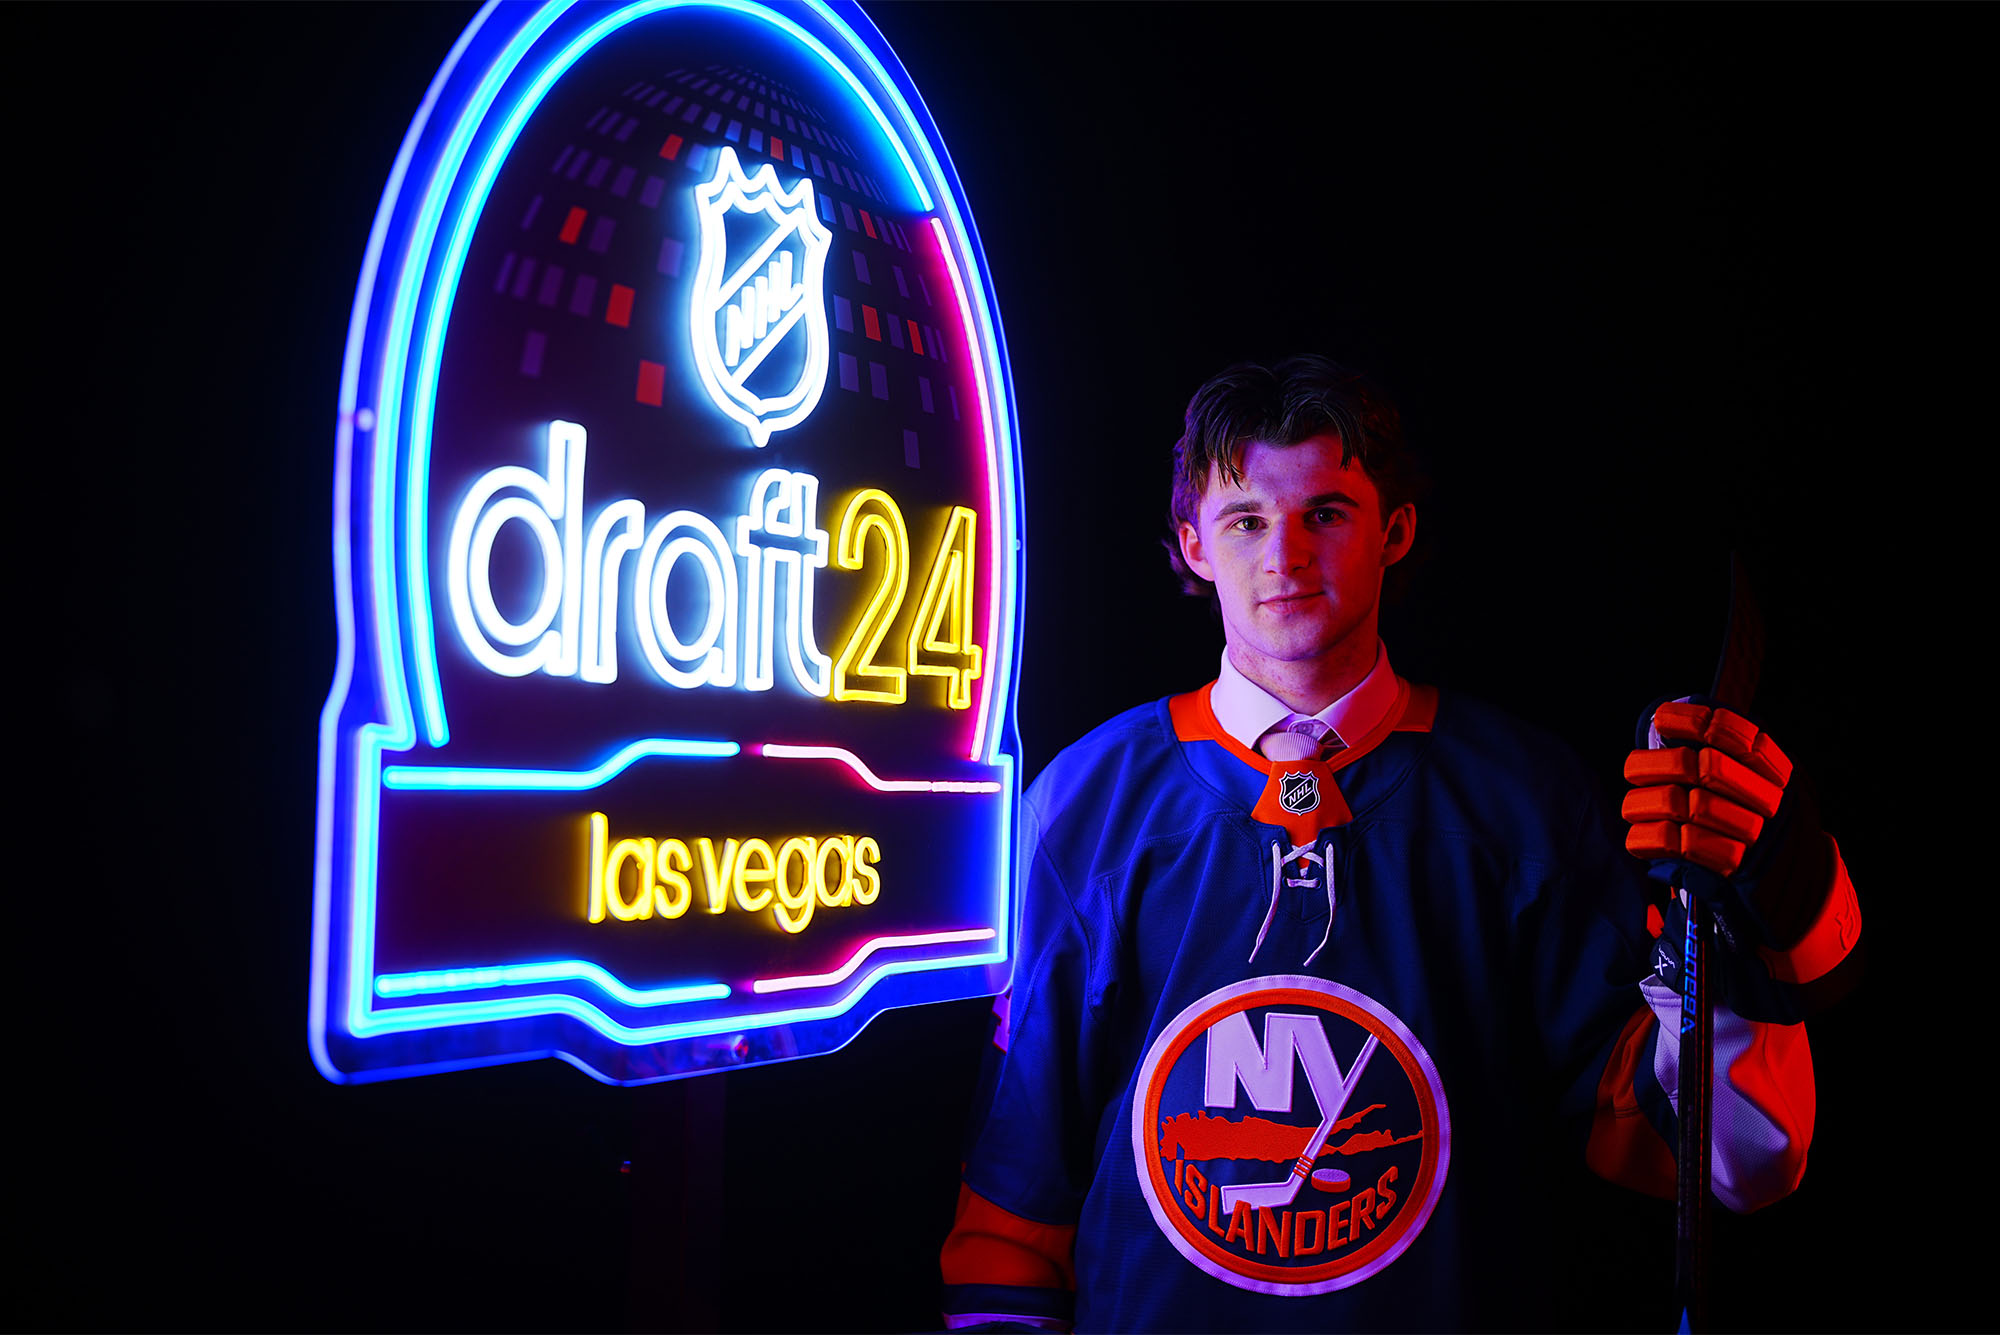 Entering BU freshman Cole Eiserman was selected 20th overall by the New York Islanders during the 2024 Upper Deck NHL Draft on June 28 at Sphere in Las Vegas. Photo by Mark Blinch/NHLI via Getty Images